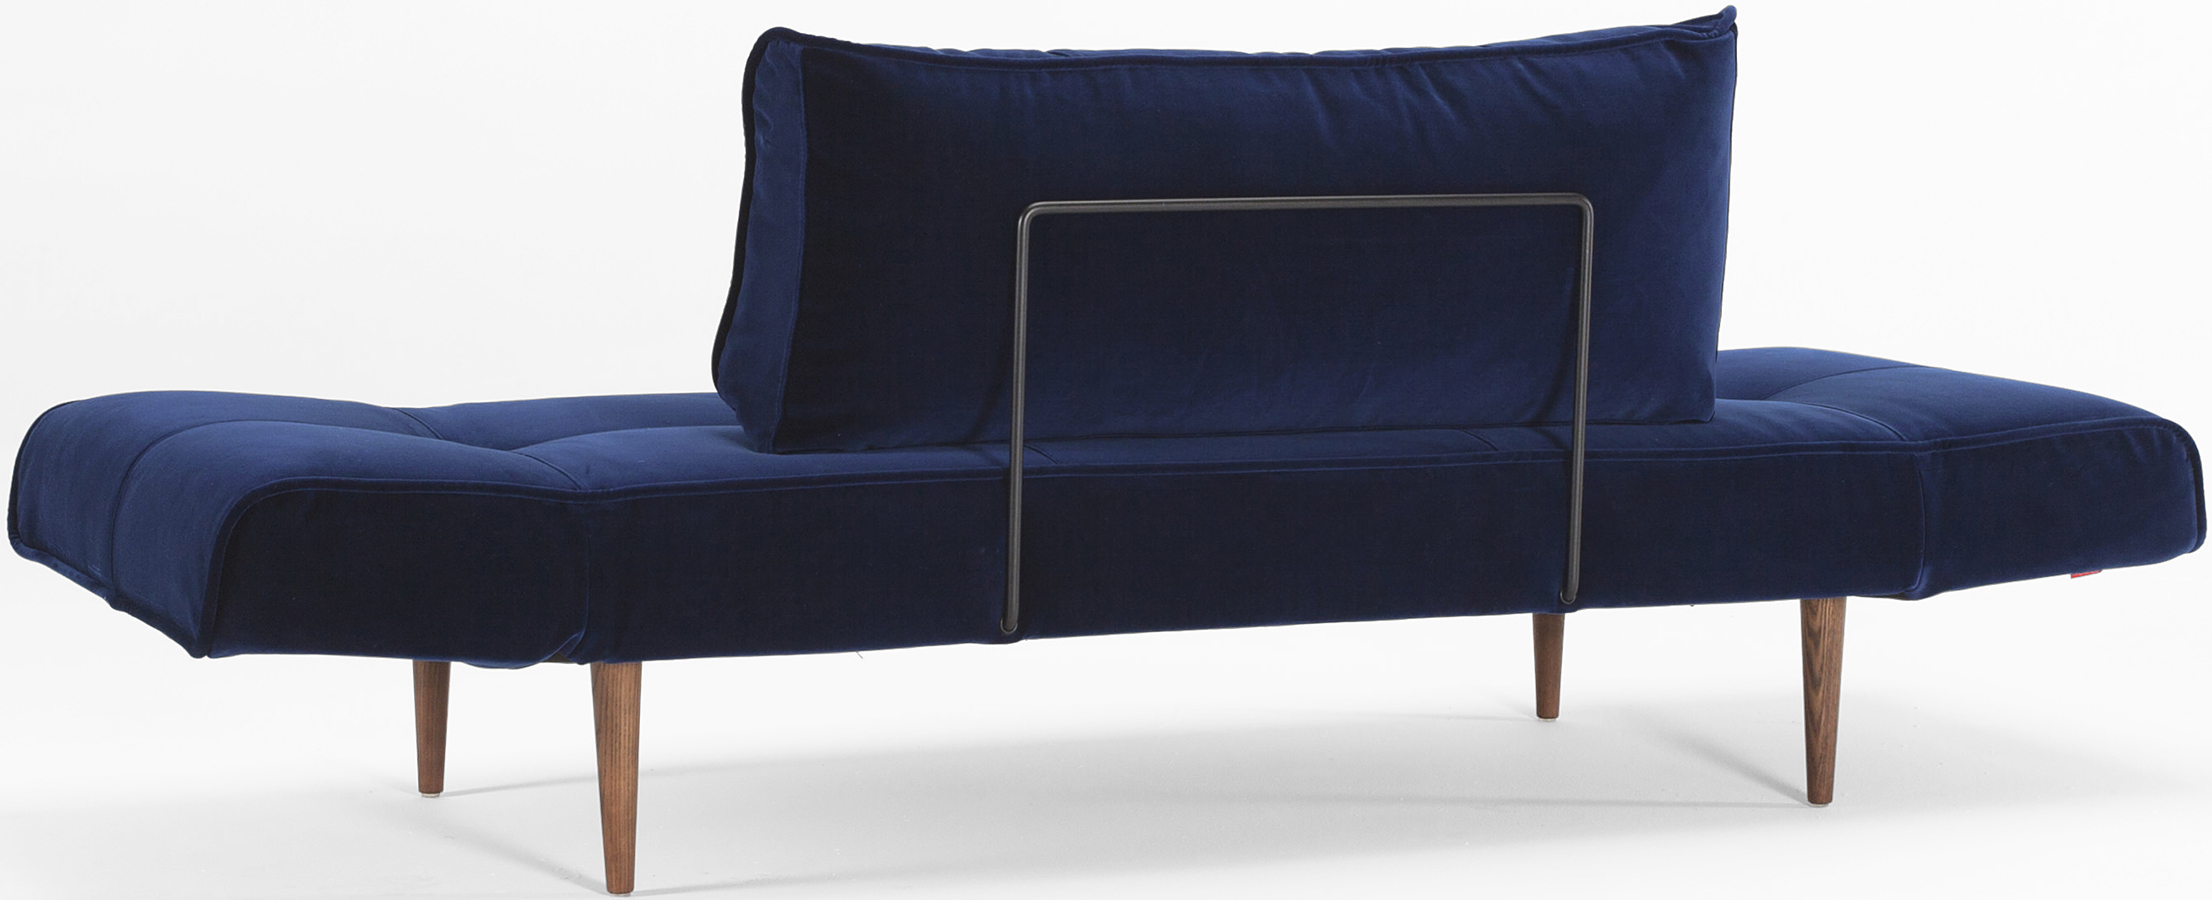 the zeal innovation living daybed